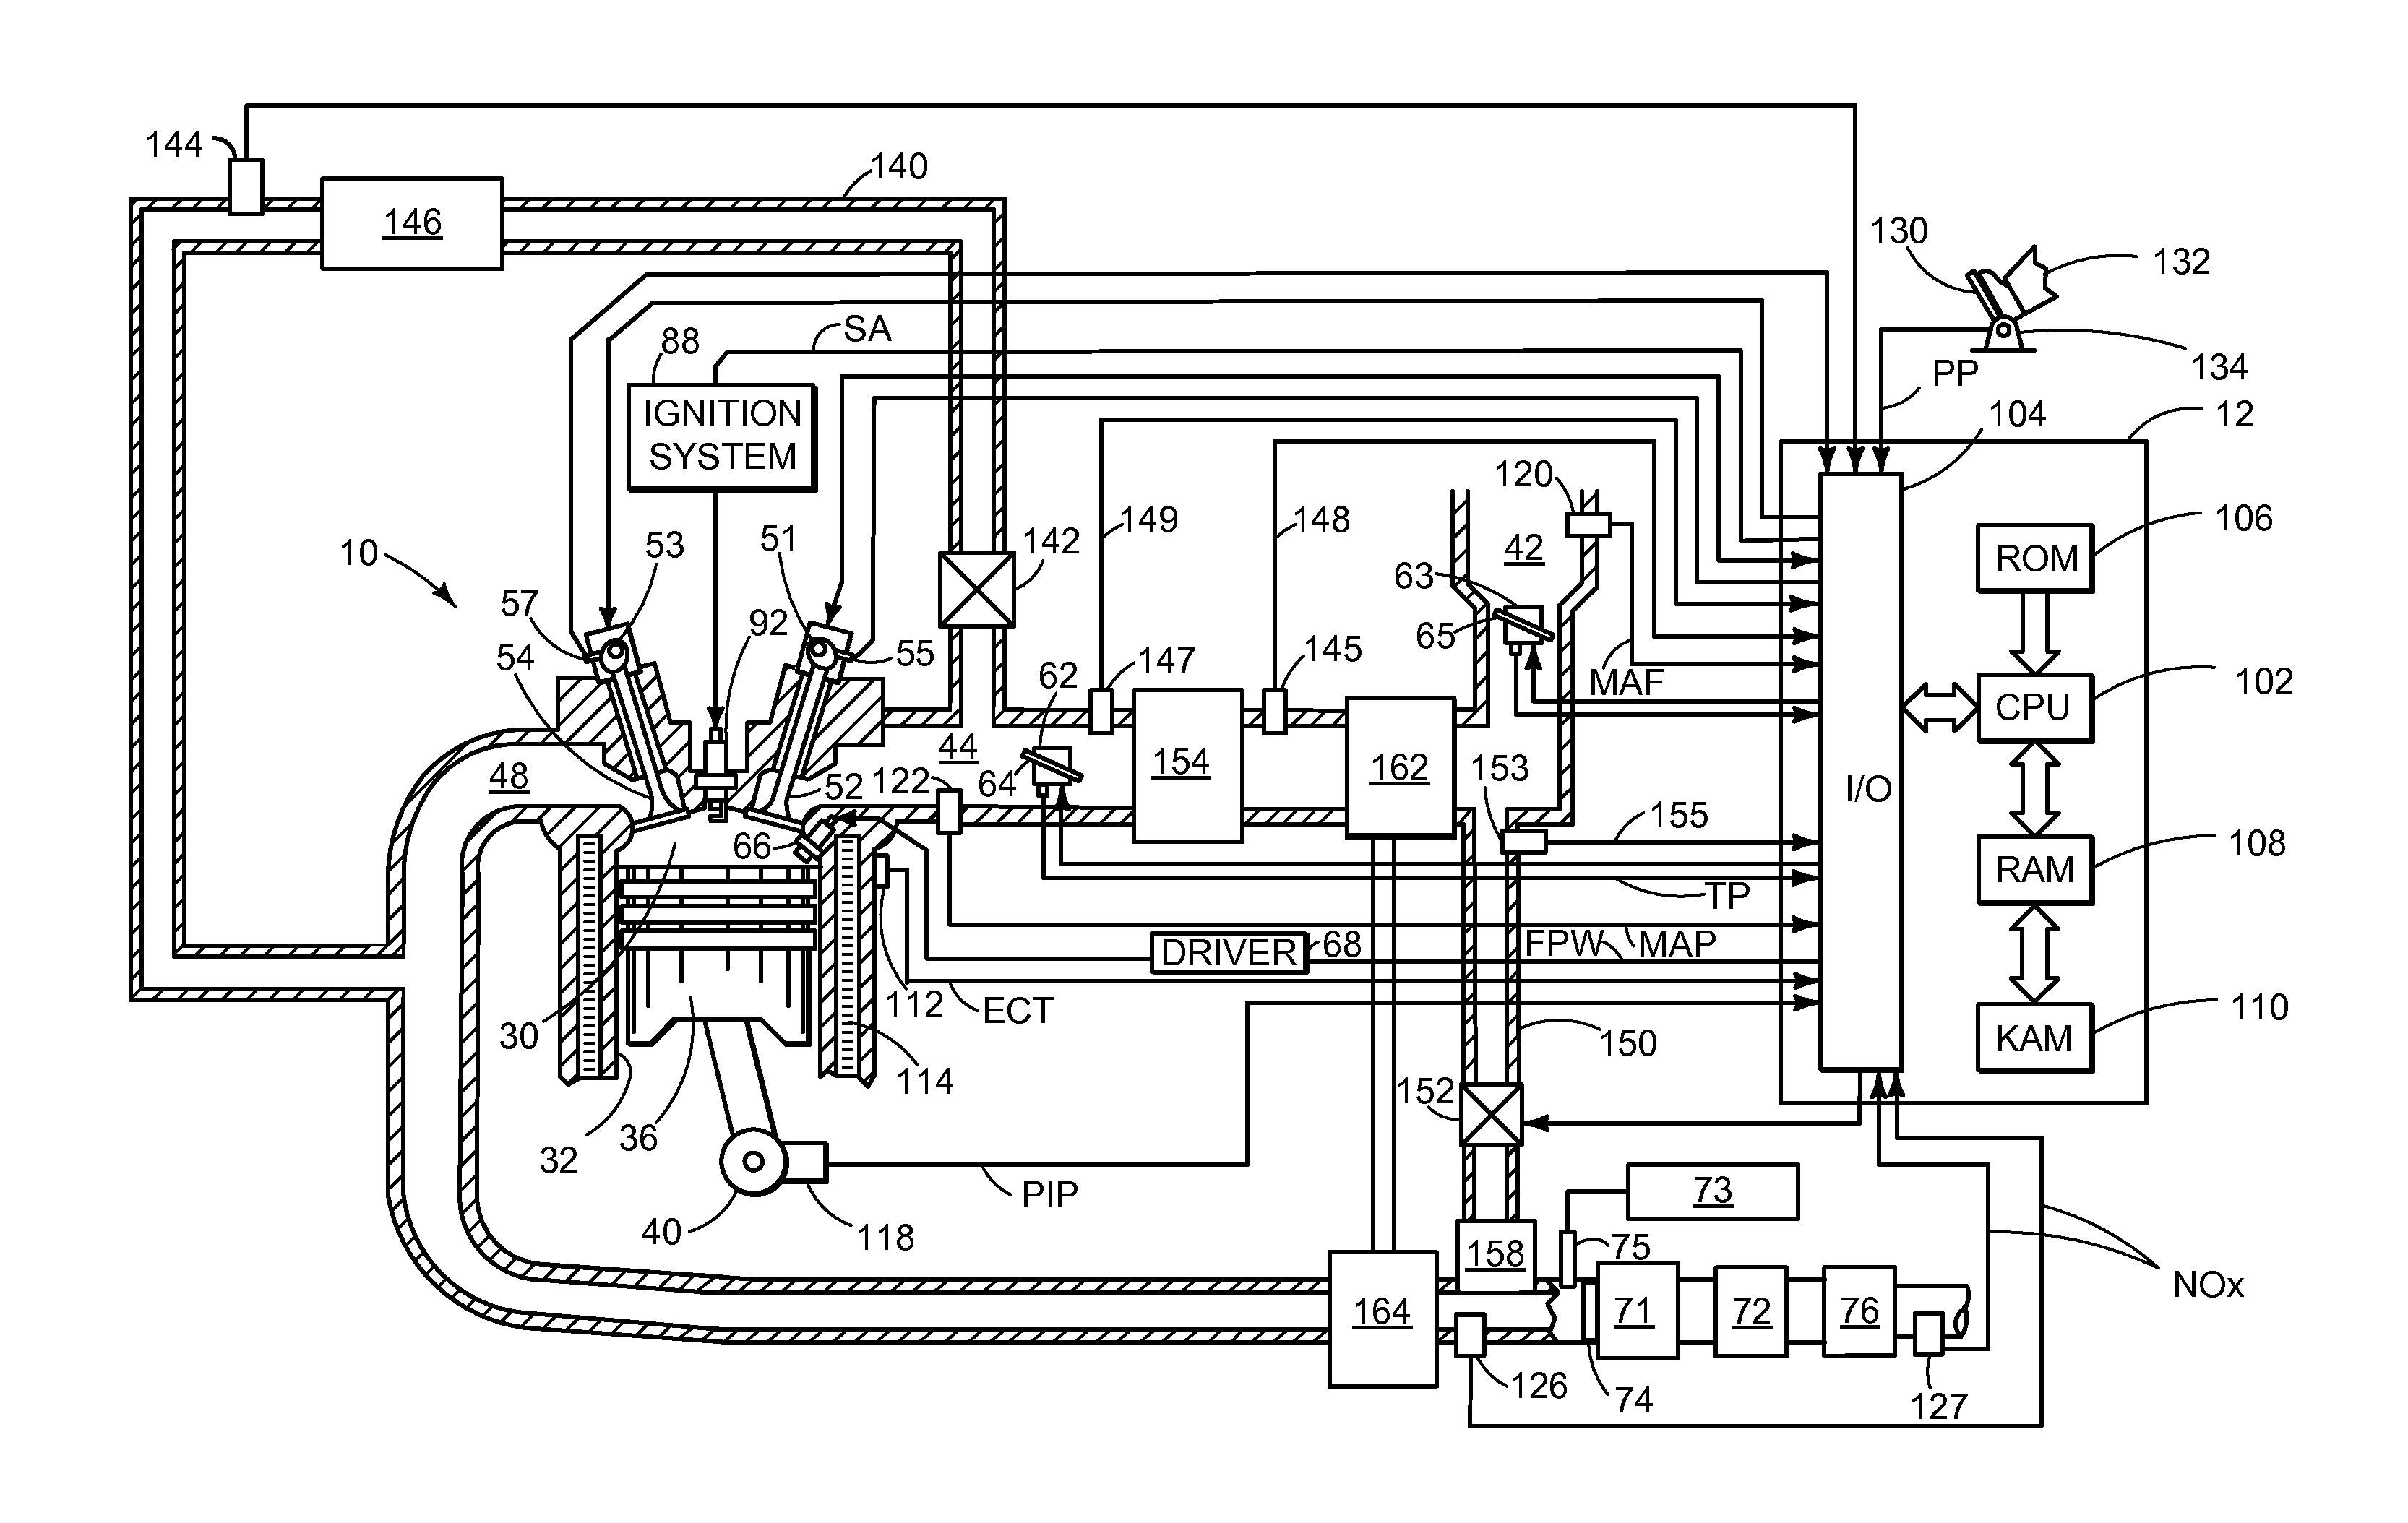 Condensate accumulation model for an engine heat exchanger